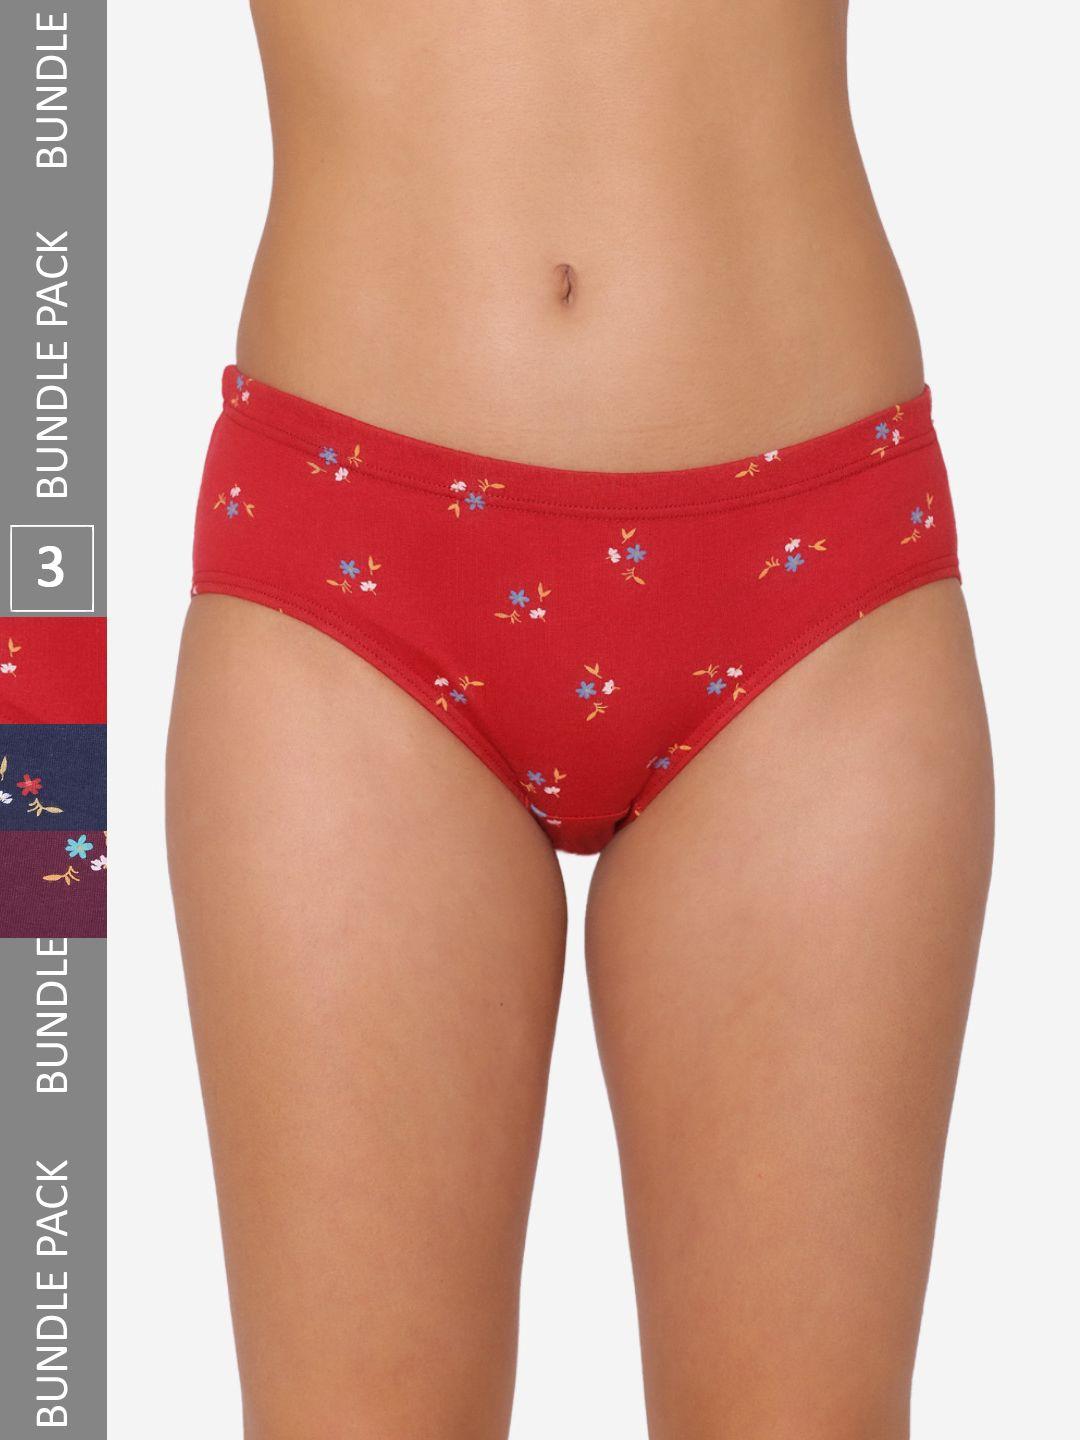 groversons paris beauty women pack of 3 assorted printed hipster briefs